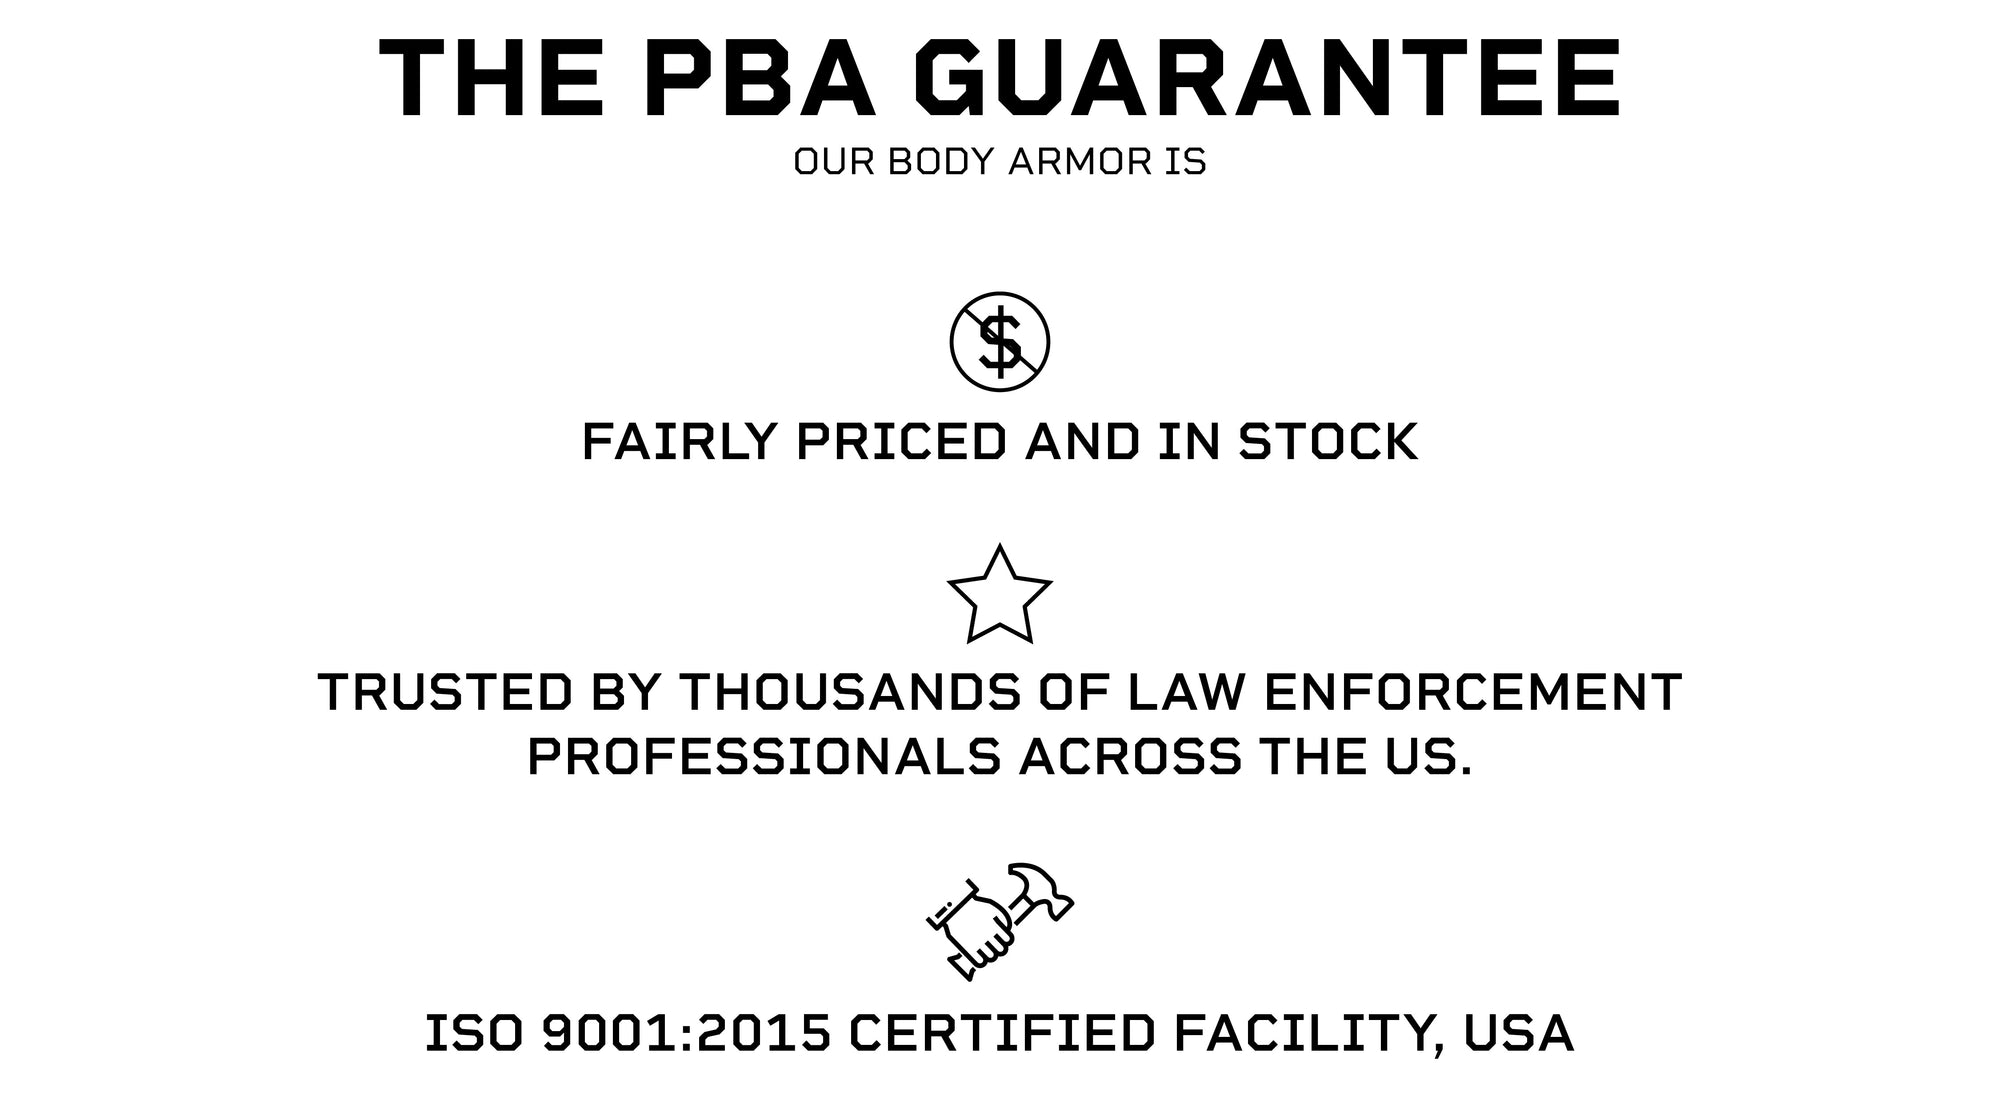 The Premier Body Armor Guarantee. Our body armor is Fairly Priced and In Stock. Trusted by thousands of Law Enforcement Professionals Across the US. Made in ISO 9001:2015 certified facility in the USA.